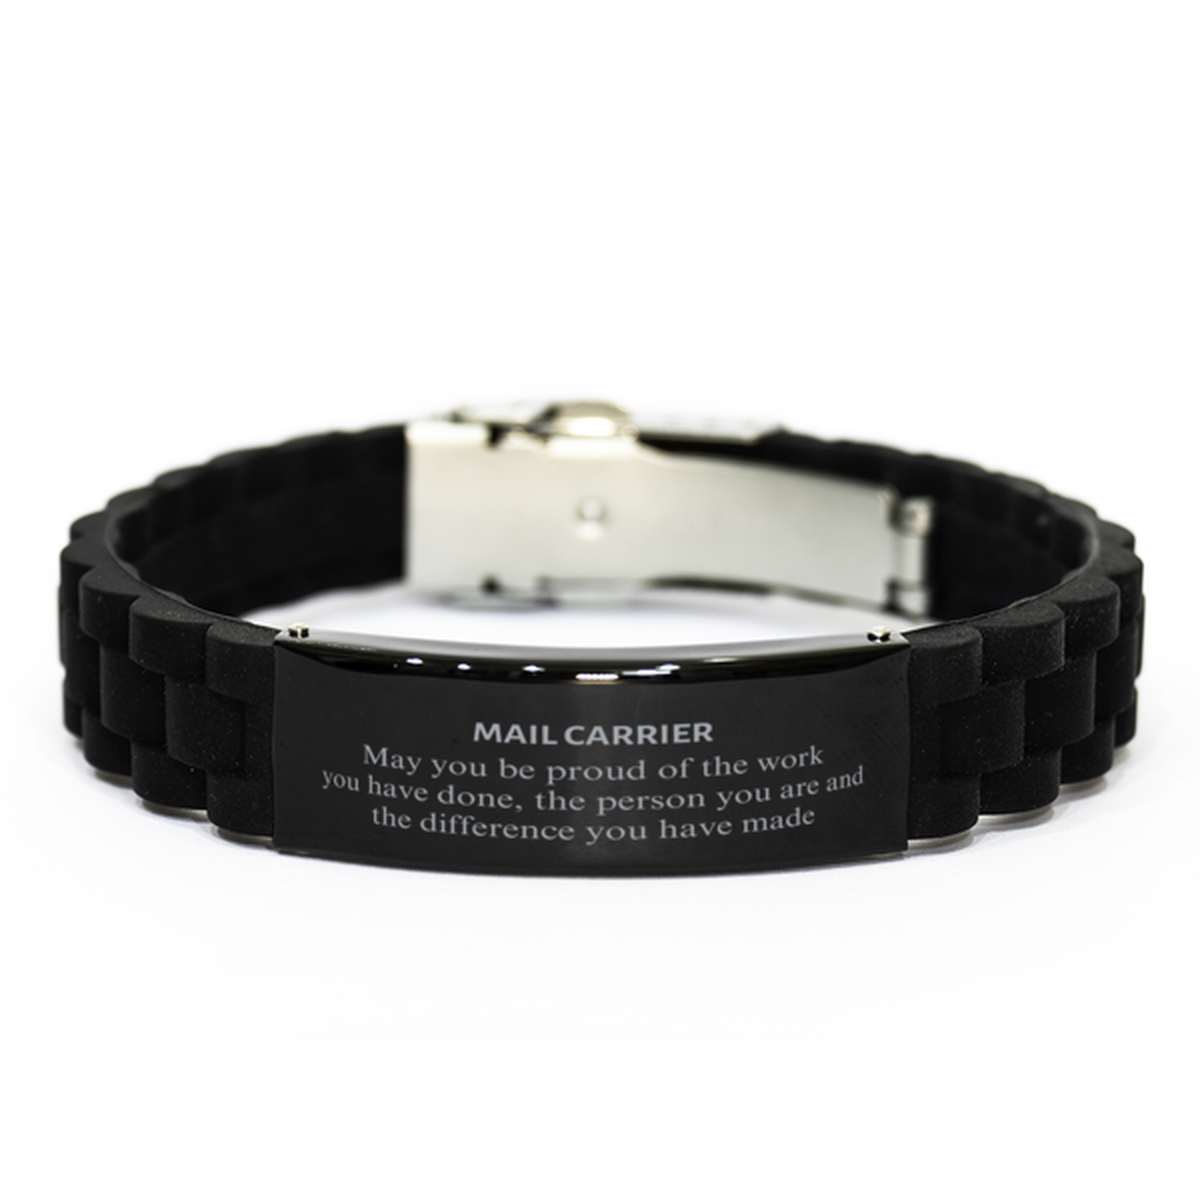 Mail Carrier May you be proud of the work you have done, Retirement Mail Carrier Black Glidelock Clasp Bracelet for Colleague Appreciation Gifts Amazing for Mail Carrier